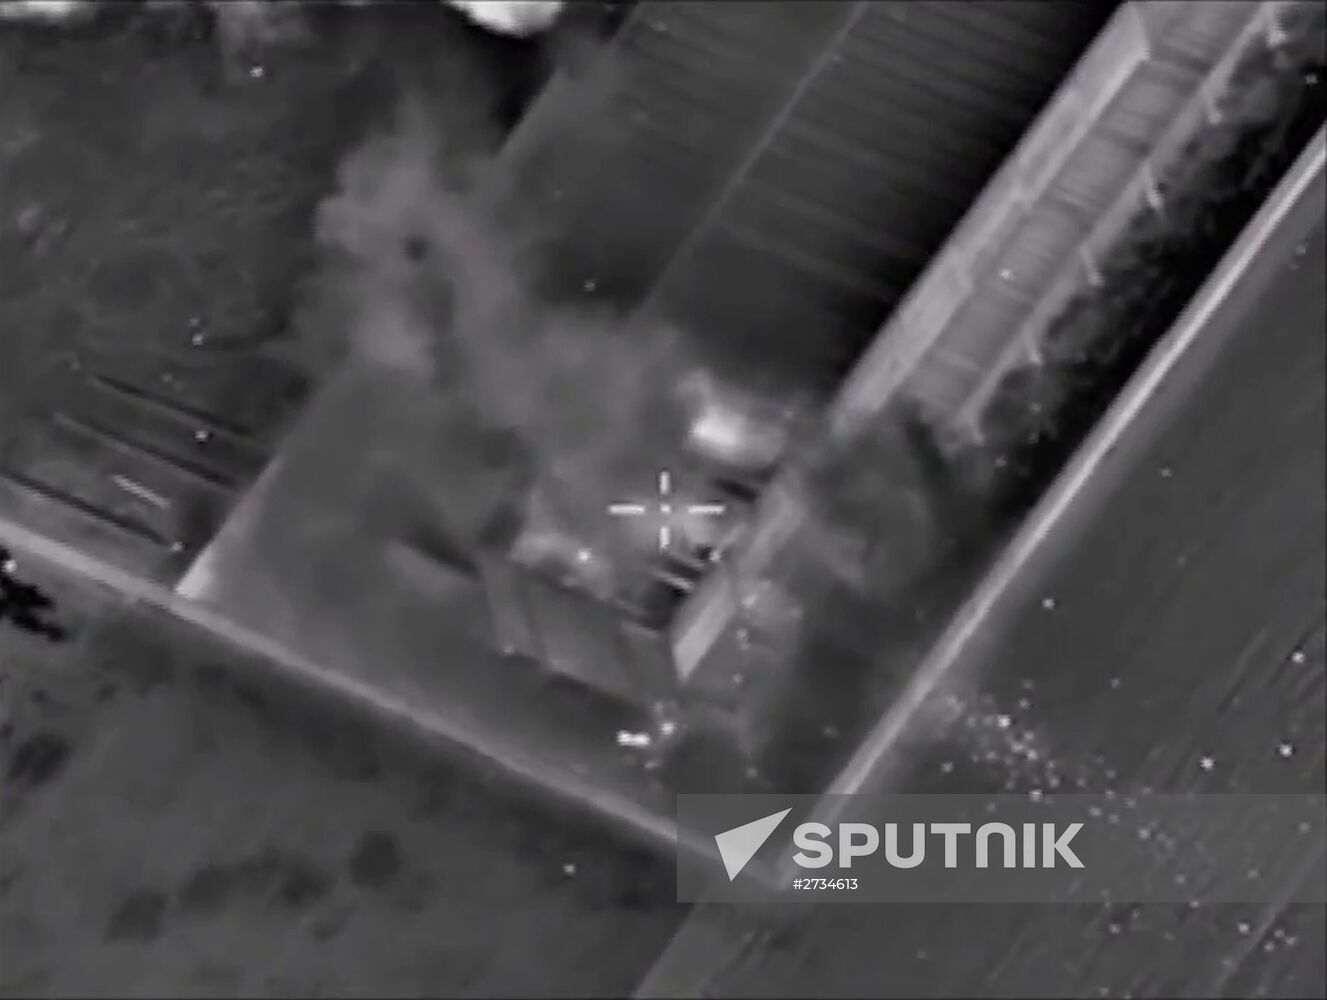 Russian Aerospace Forces carry out strikes on ISIS positions in Syria